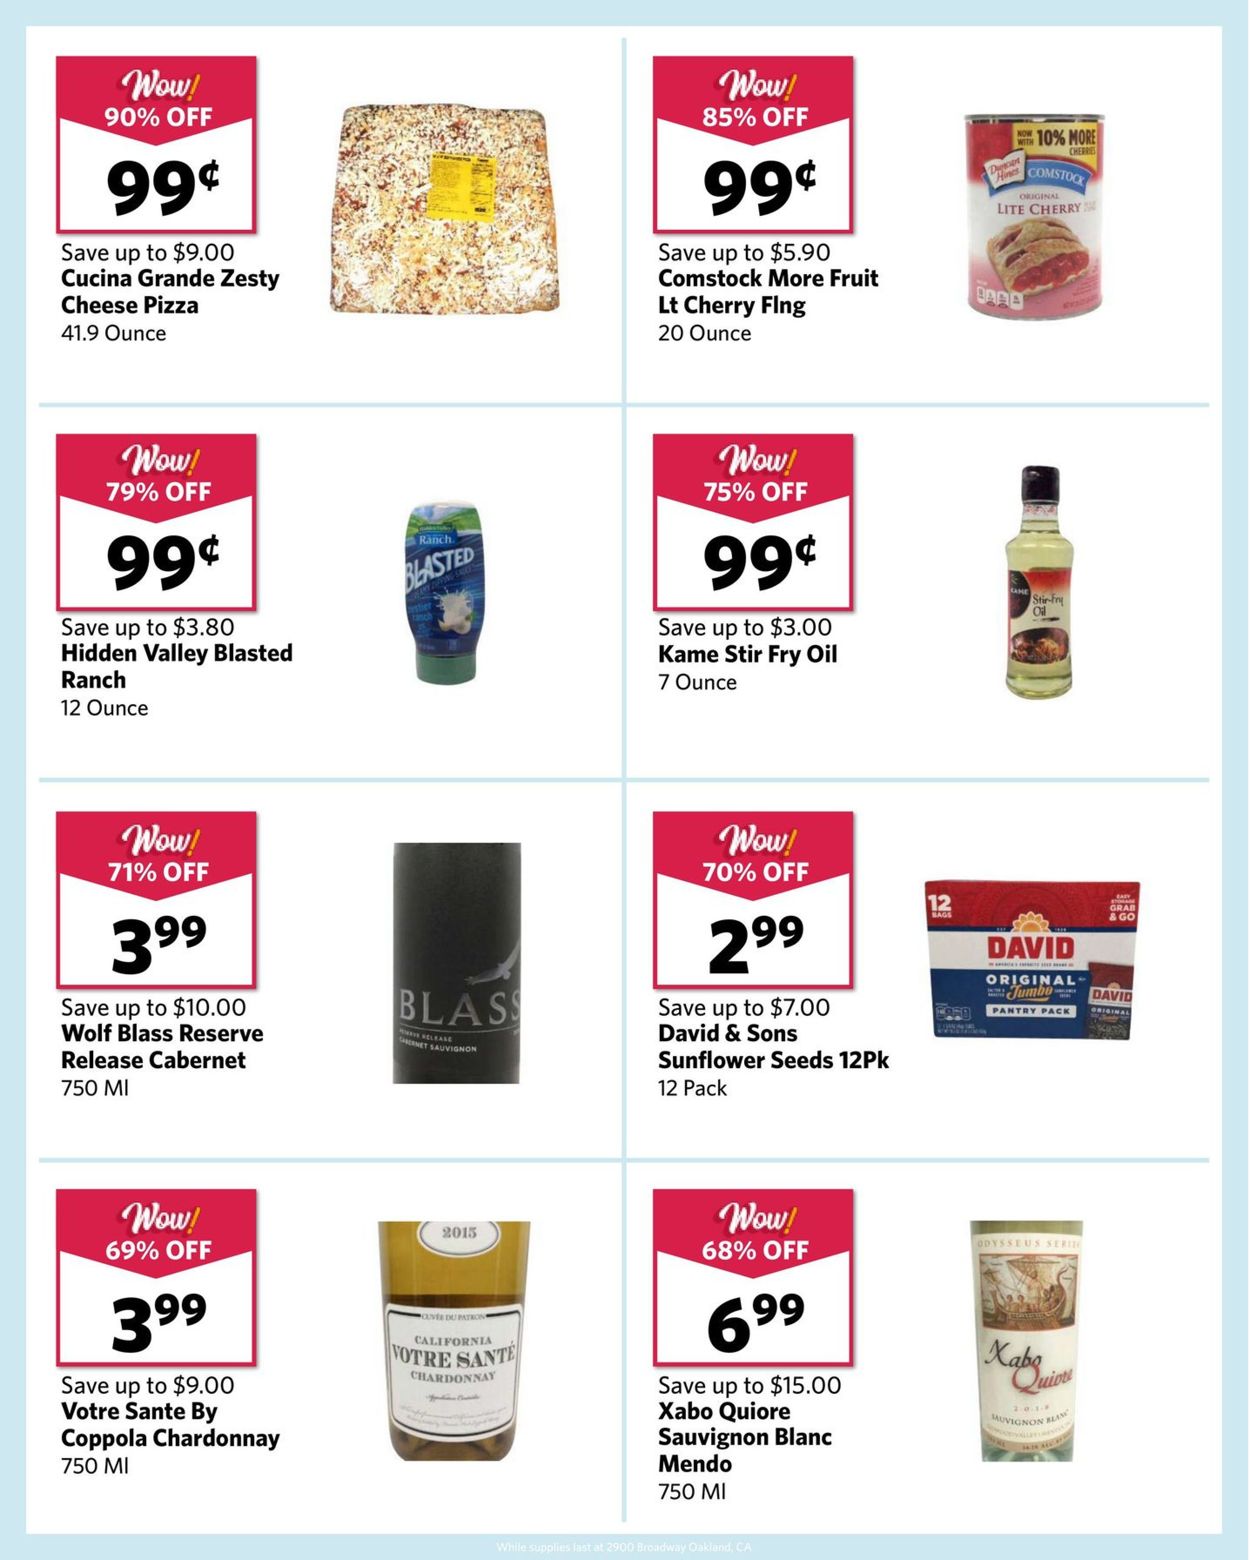 Catalogue Grocery Outlet - Holiday Ad 2019 from 11/27/2019